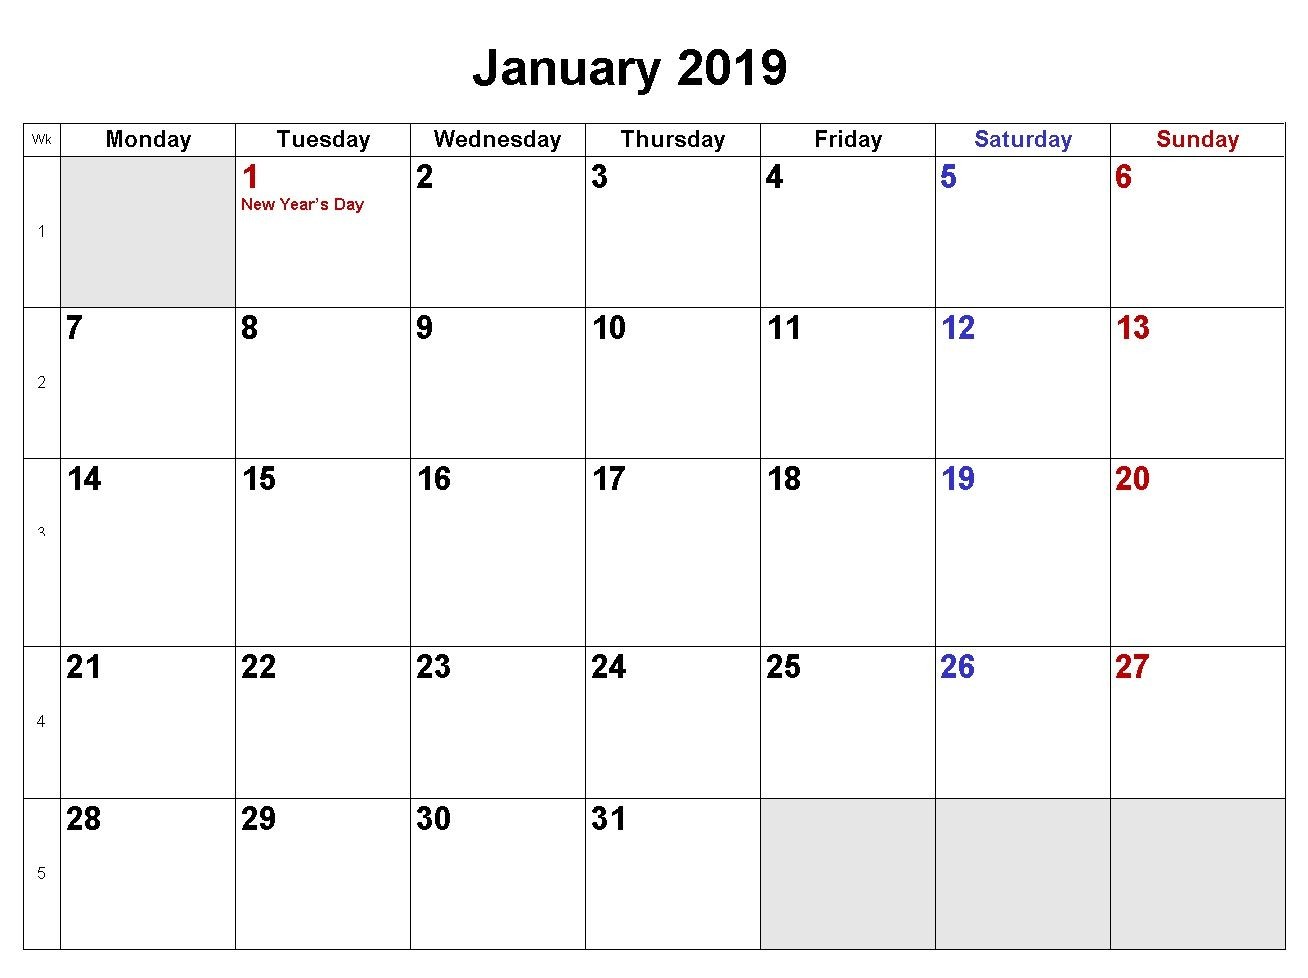 January 2019 Calendar Download in Word Excel PDF Formats